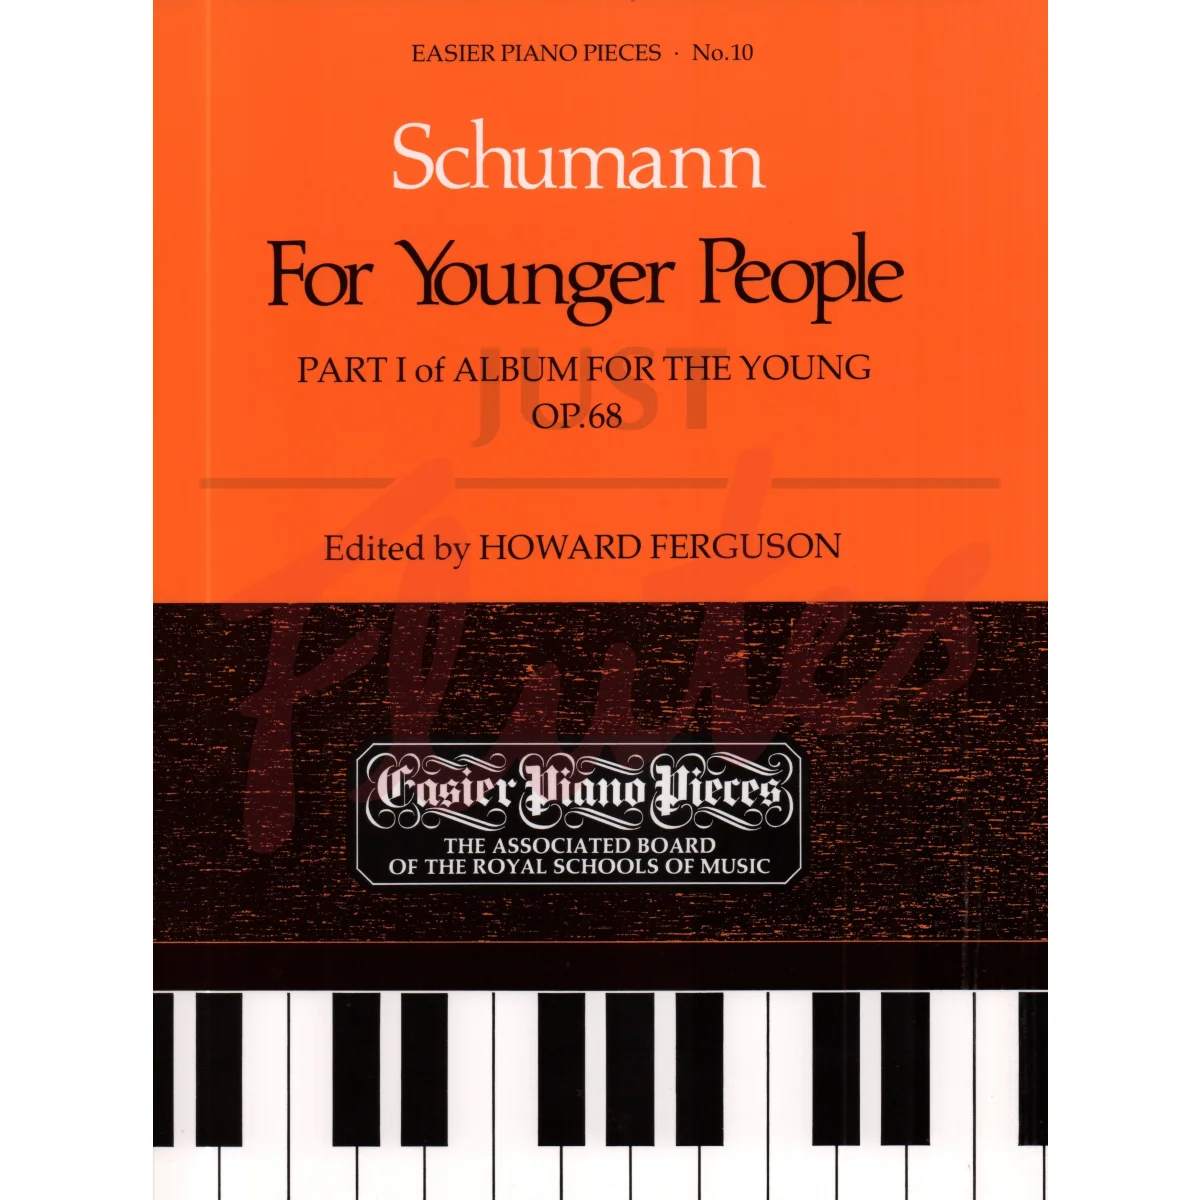 Schumann for Younger People, Part 1